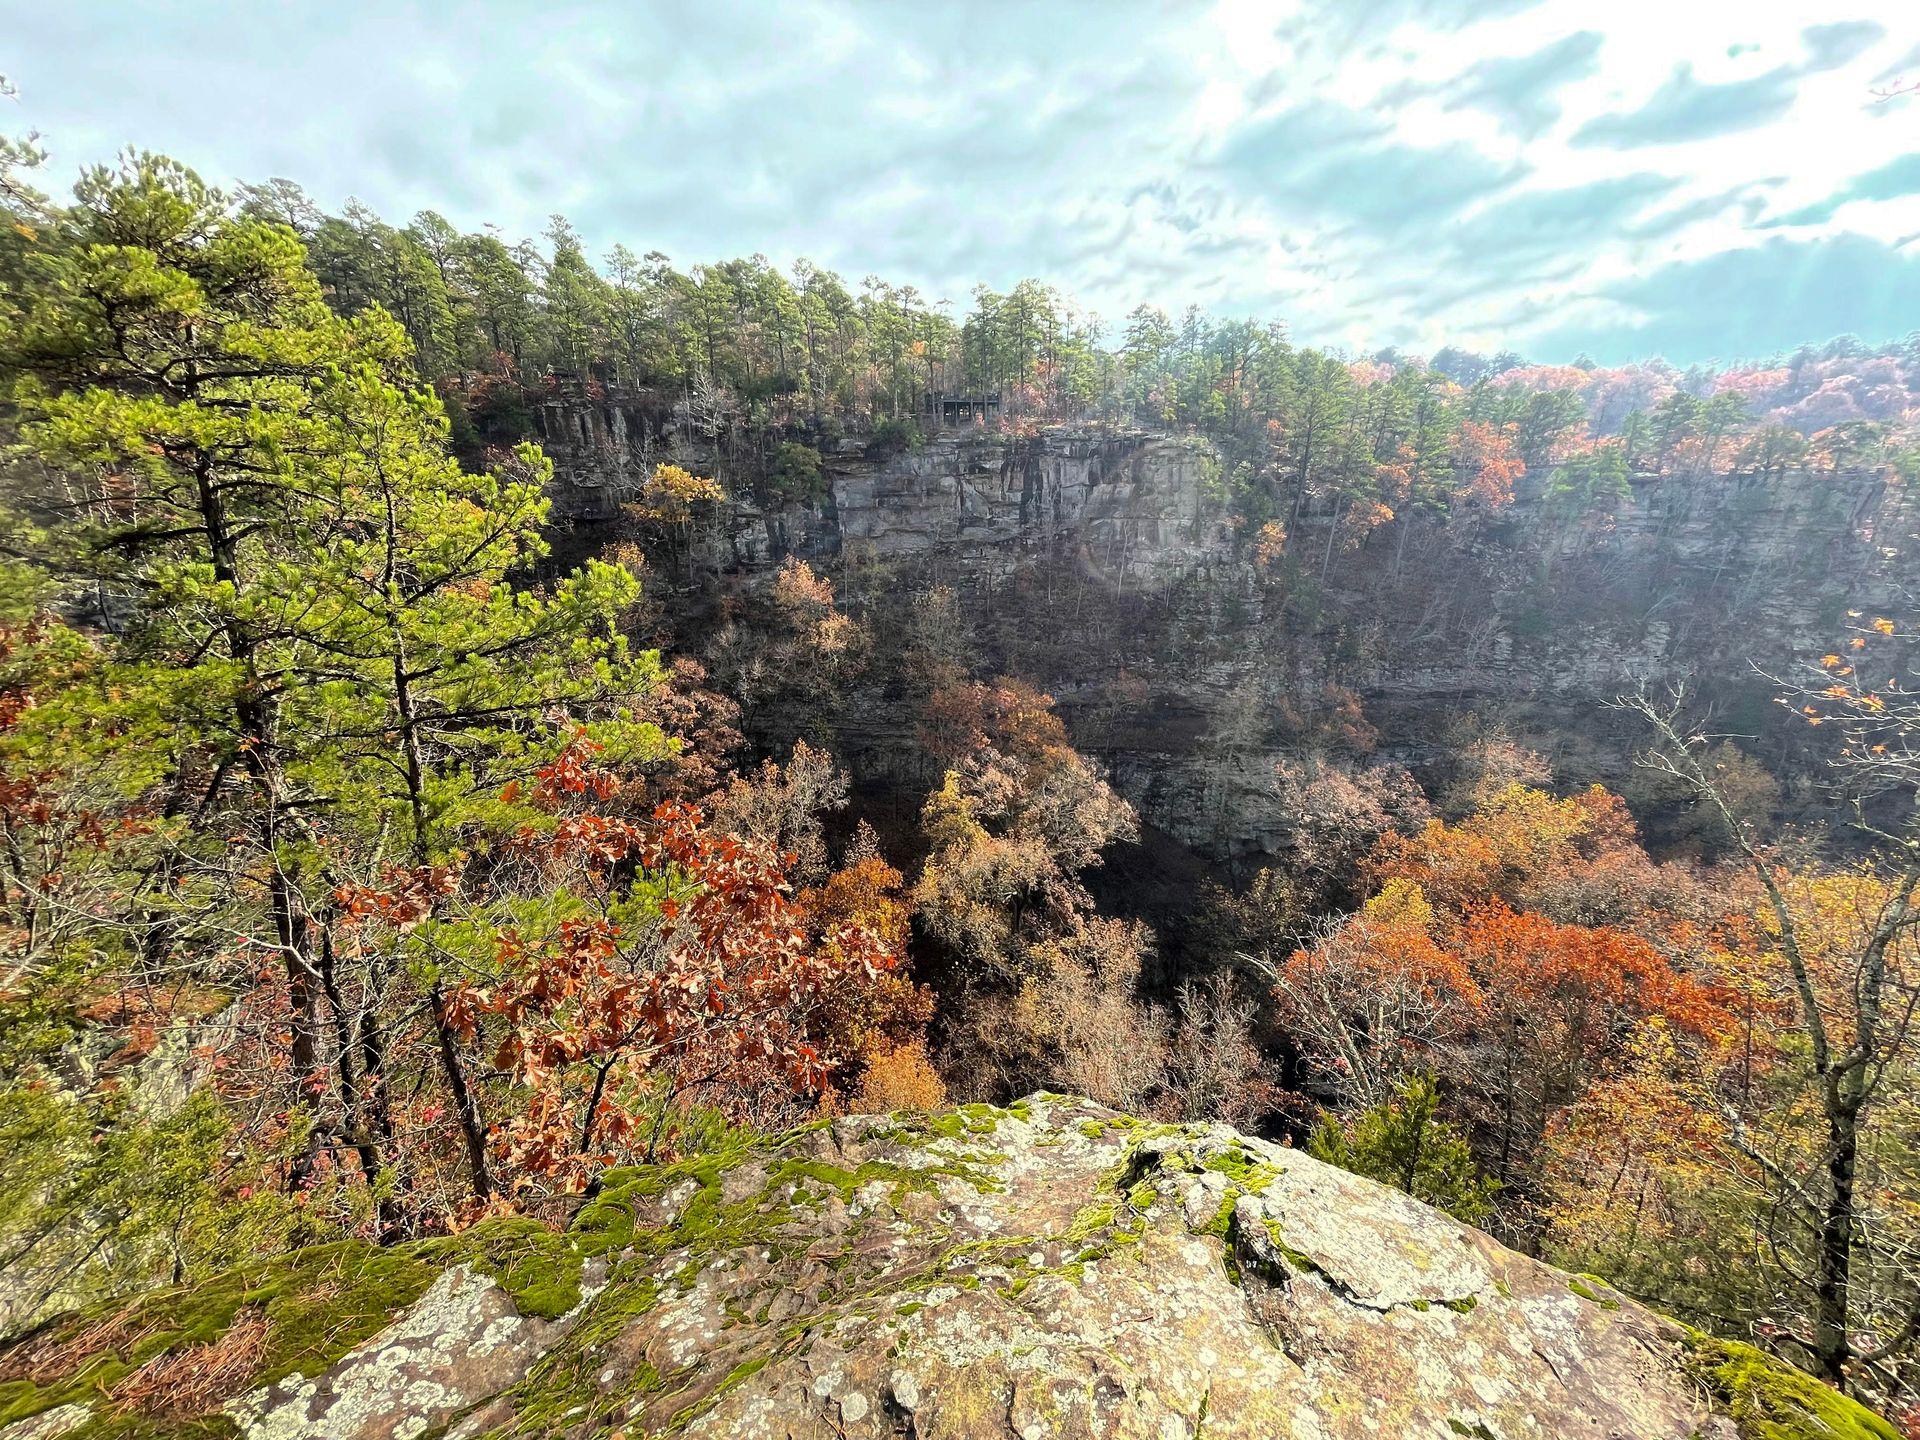 A view of a rock face surrounded by trees in colorful fall foliage.